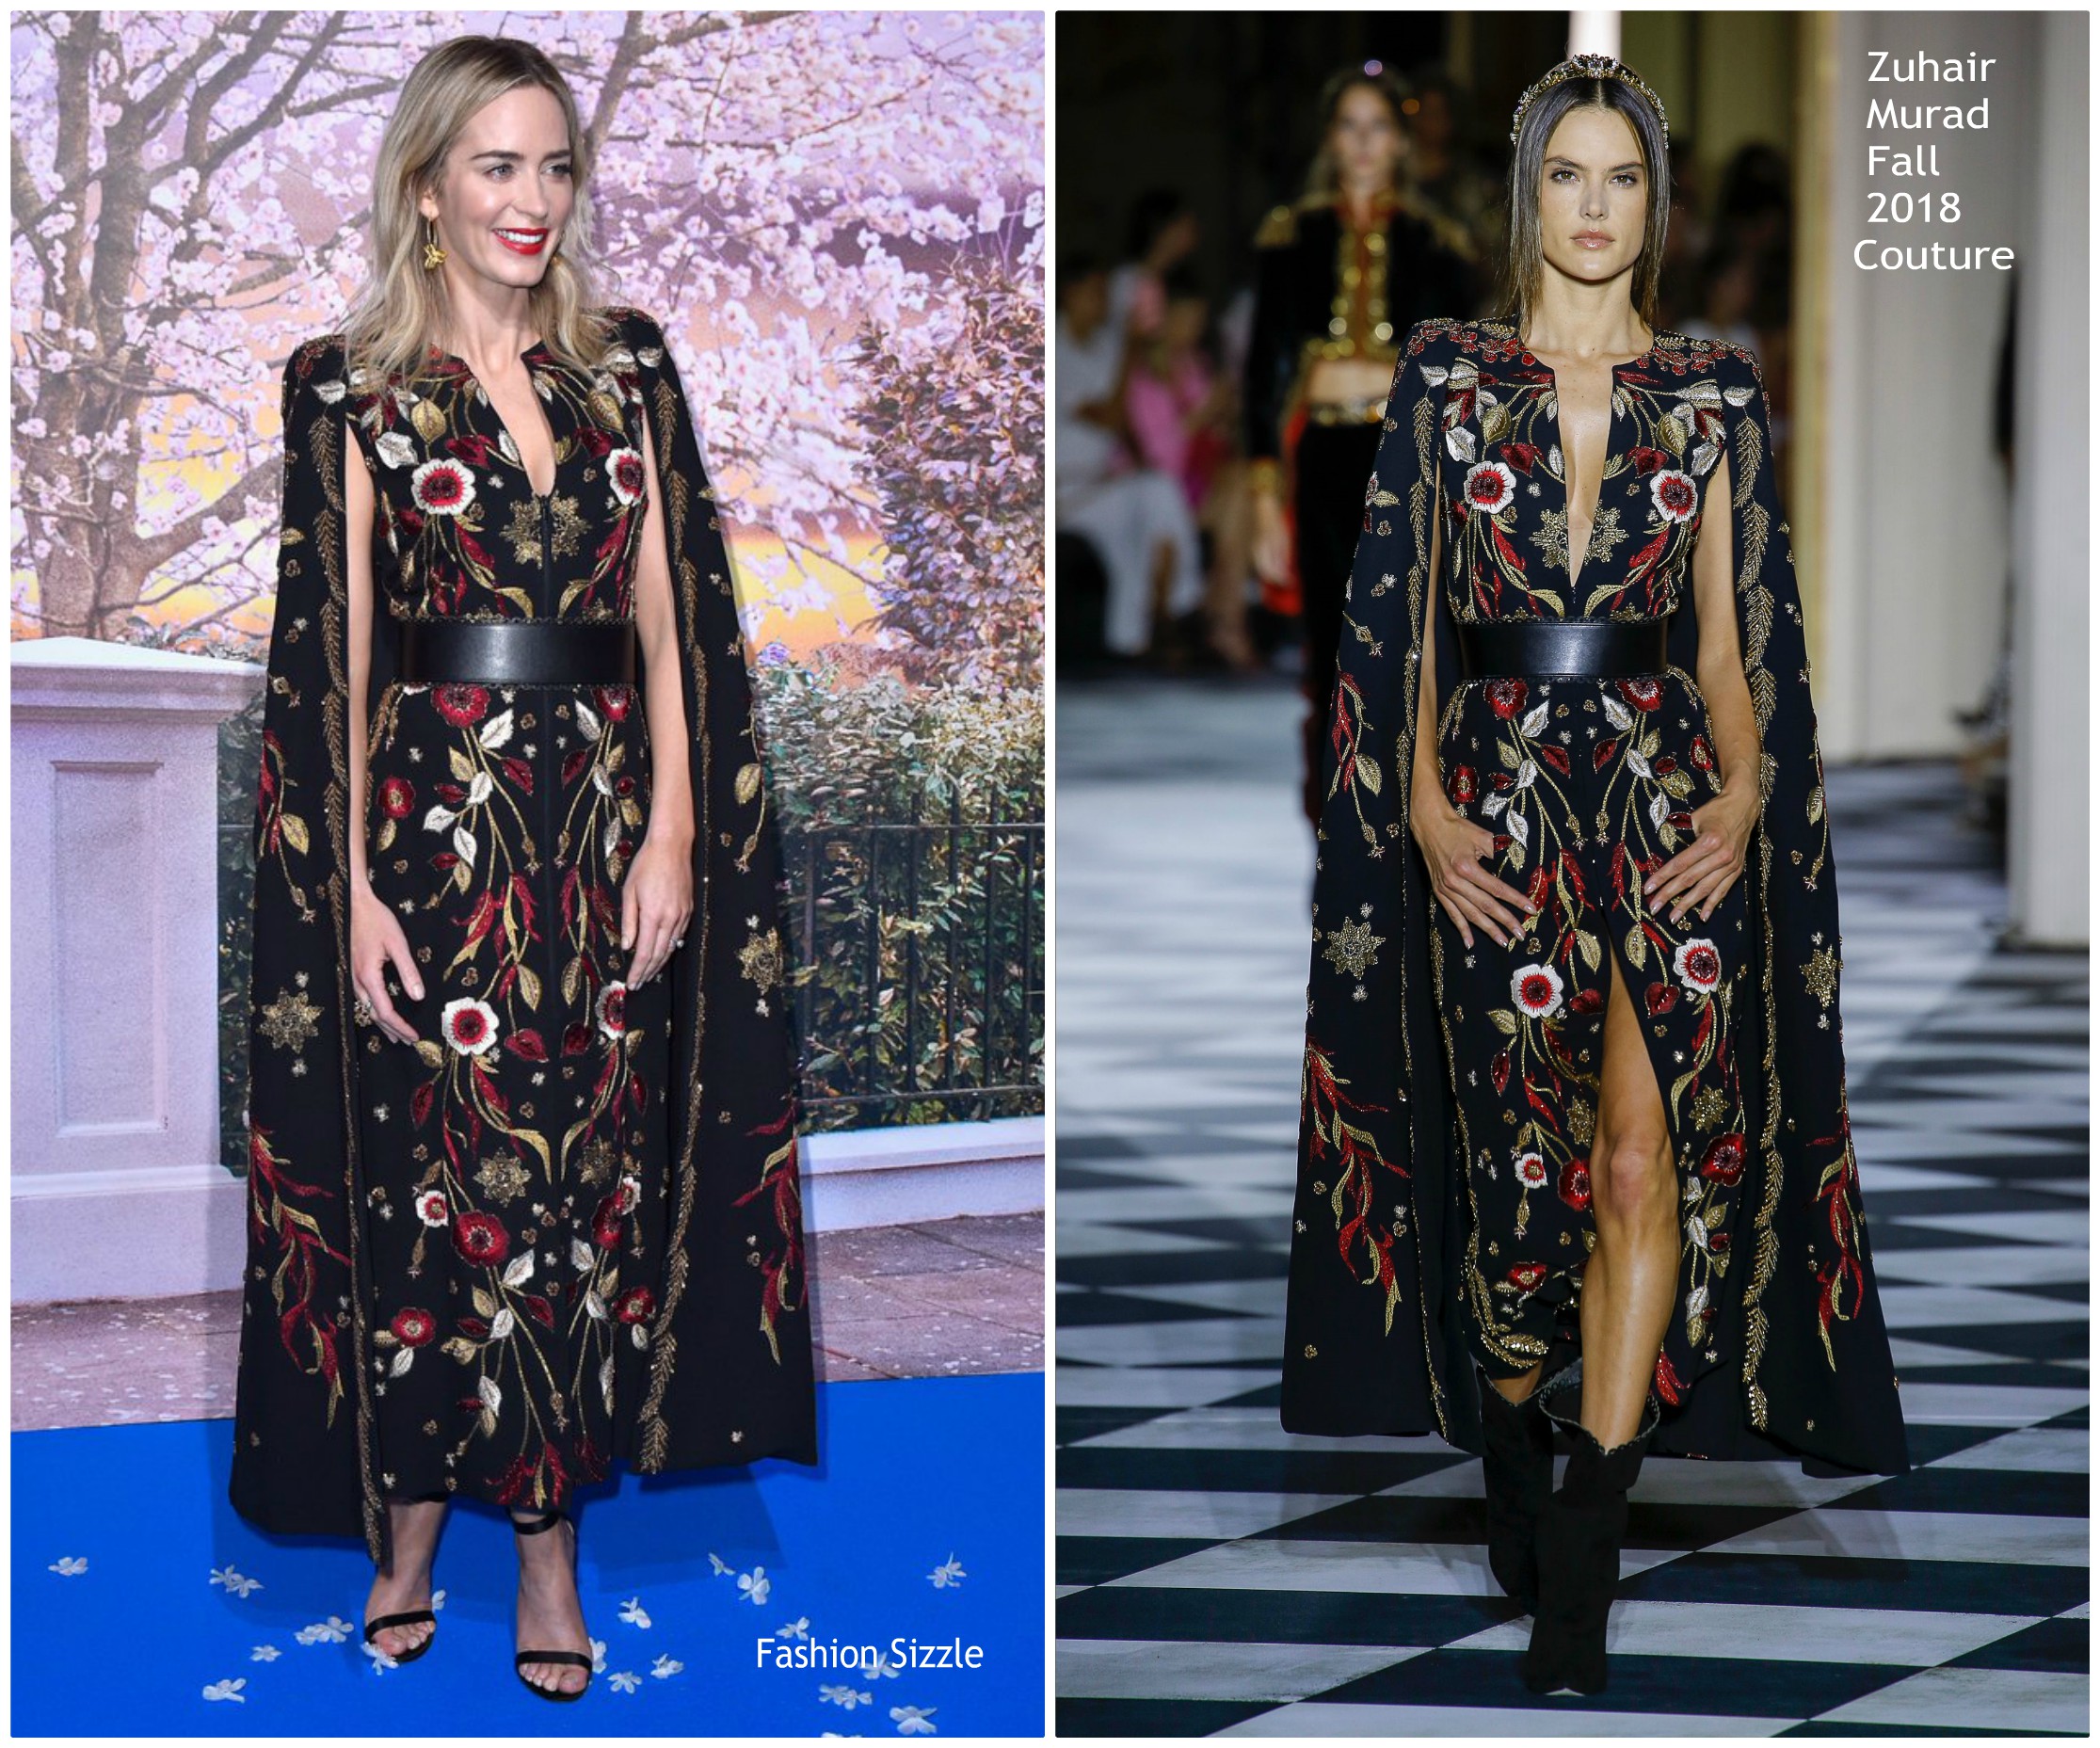 Emily Blunt In Zuhair Murad Couture @ ‘Mary Poppins Returns’ Paris Premiere